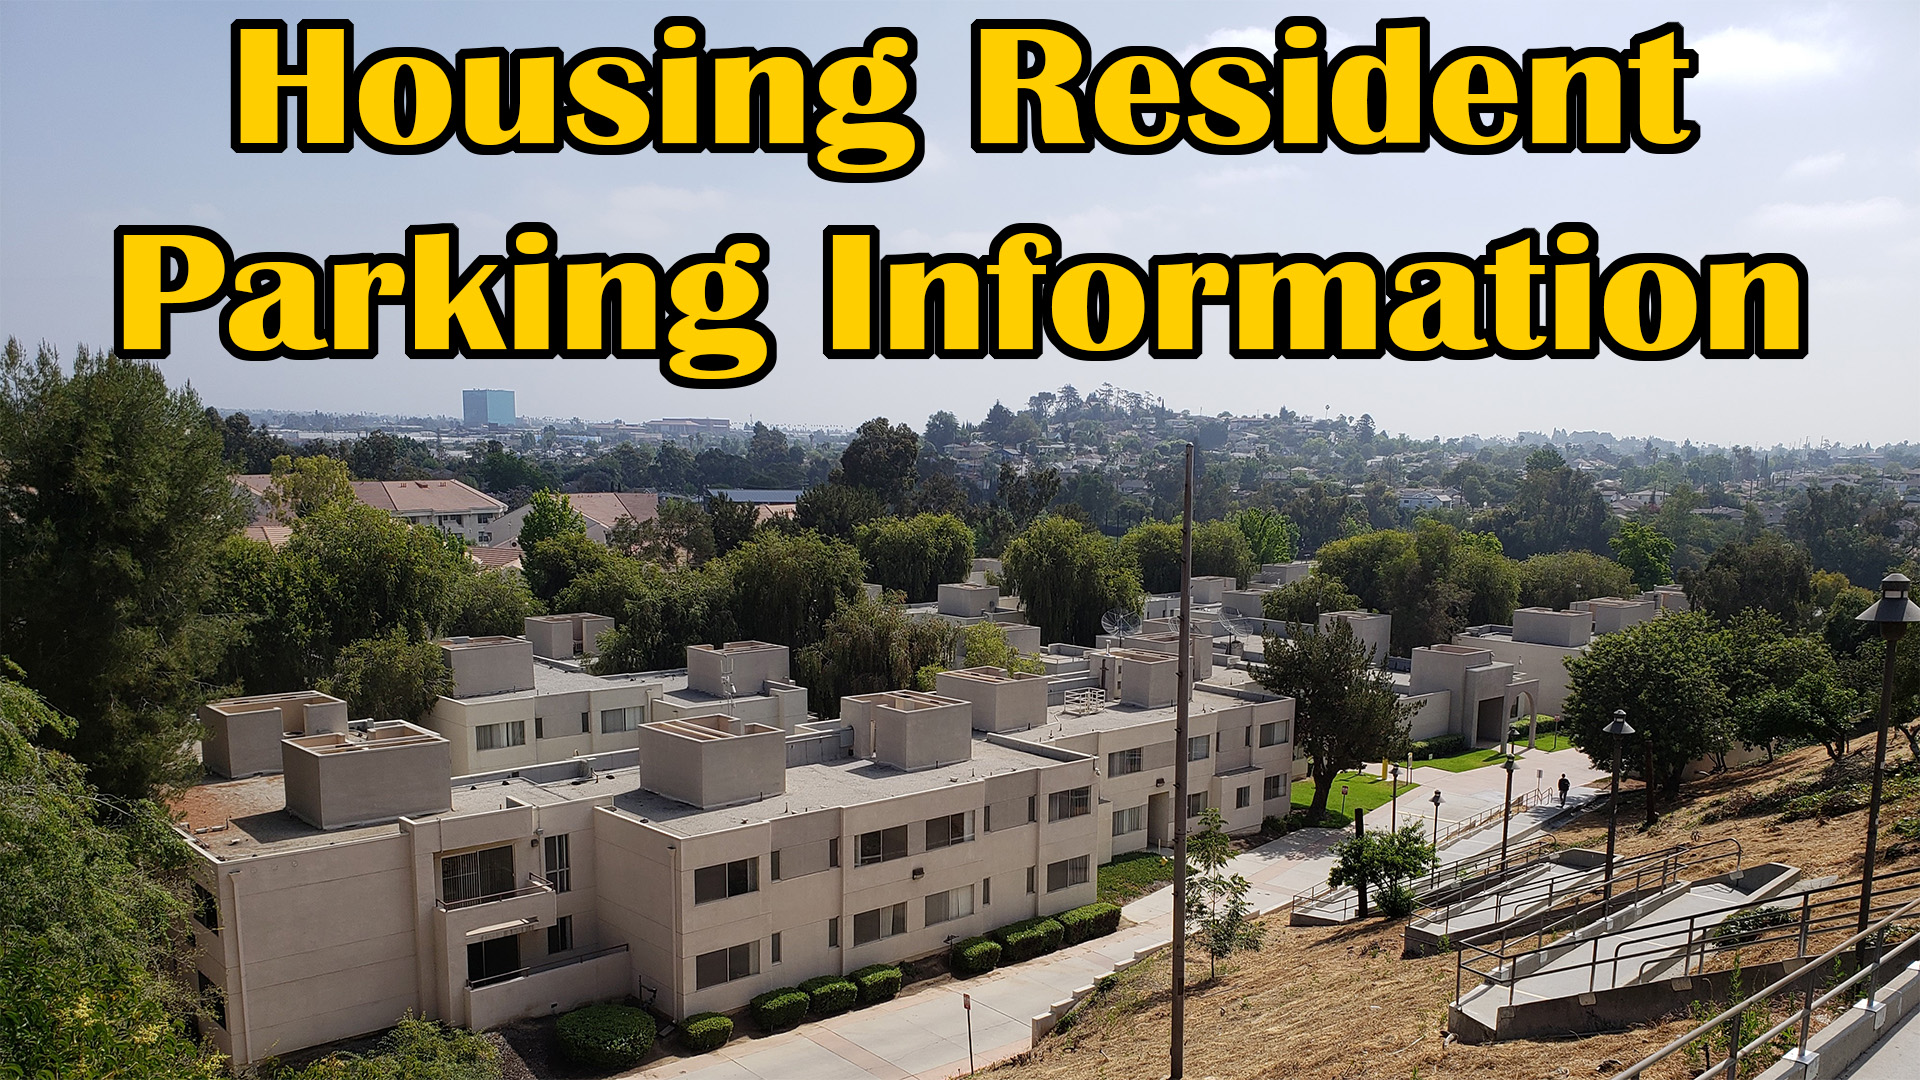 Parking information for Cal State LA Housing Residents